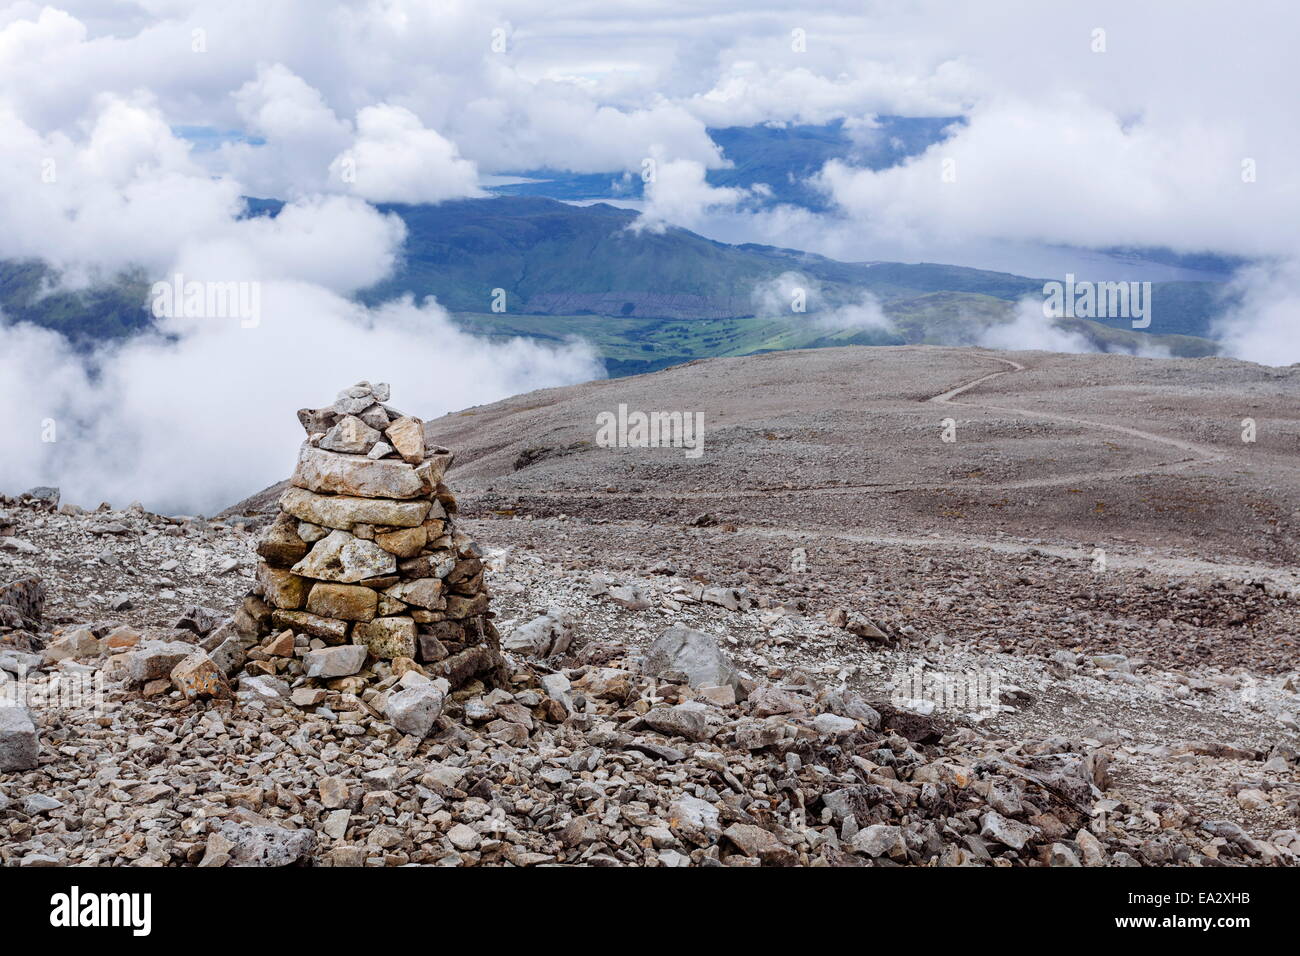 A pile of stones made by hikers and climbers along the Mountain Track (Tourist Route), Ben Nevis, Highlands, Scotland, UK Stock Photo